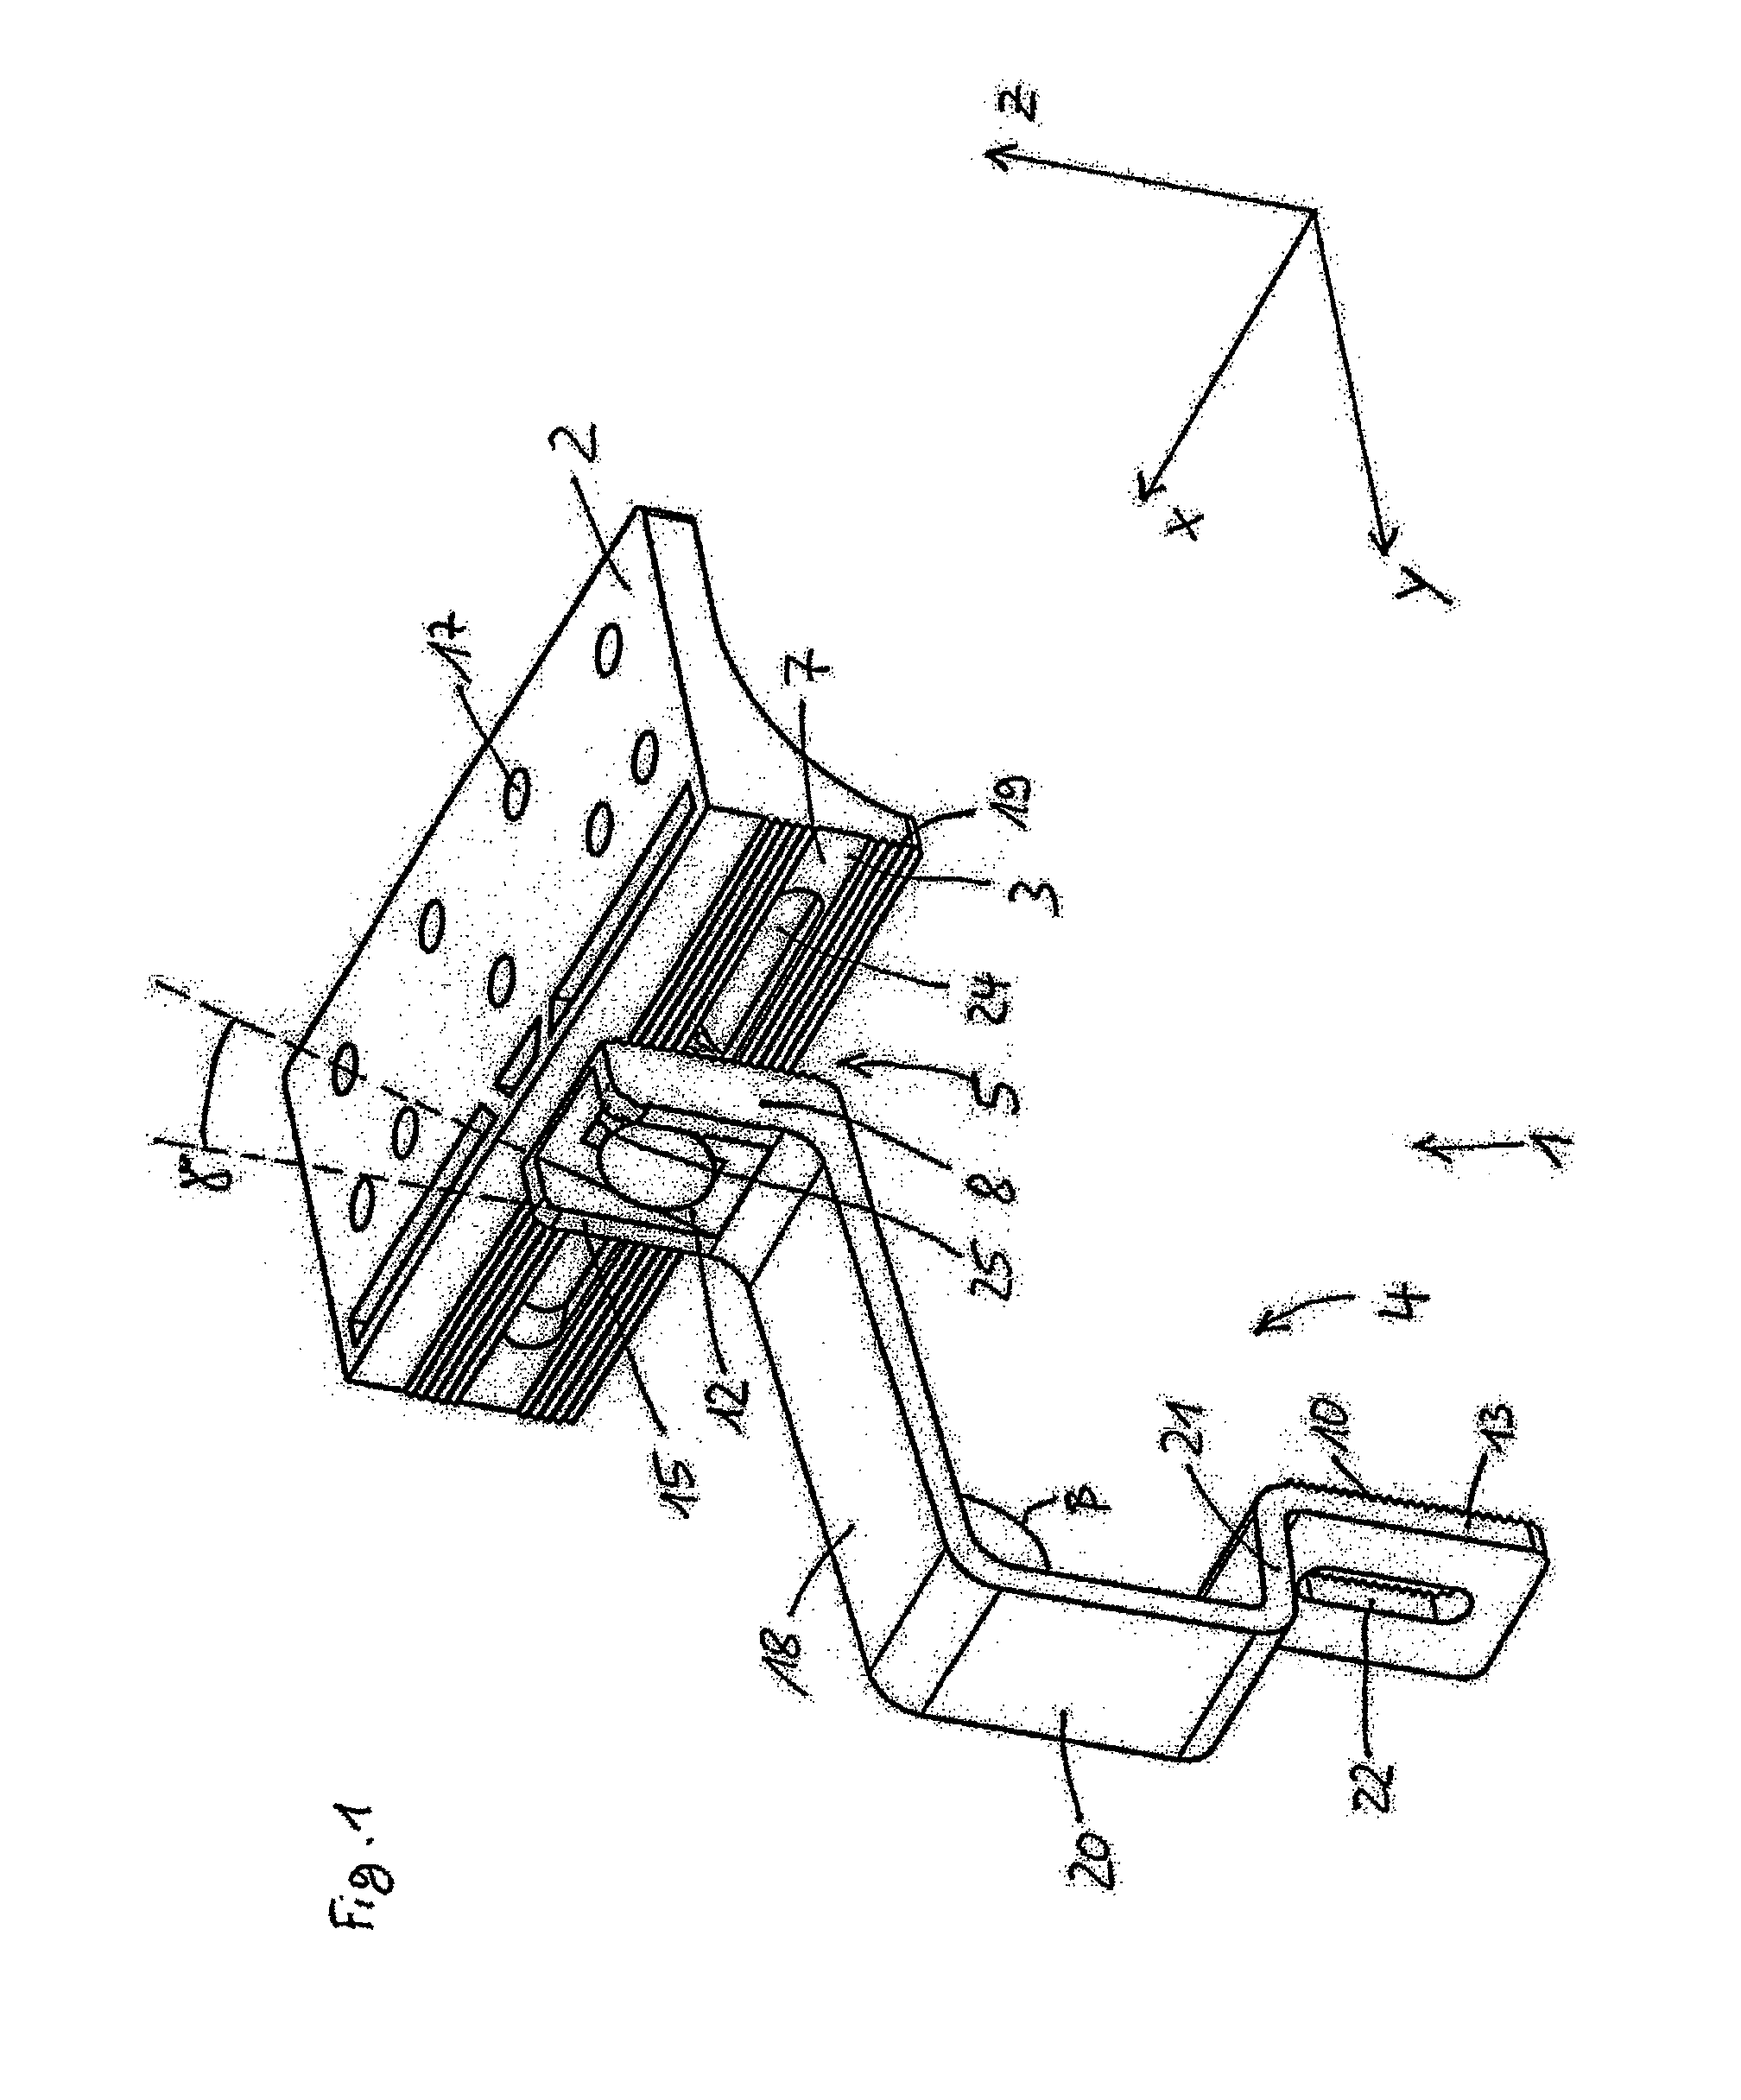 Mounting system for installing solar system modules on roofs